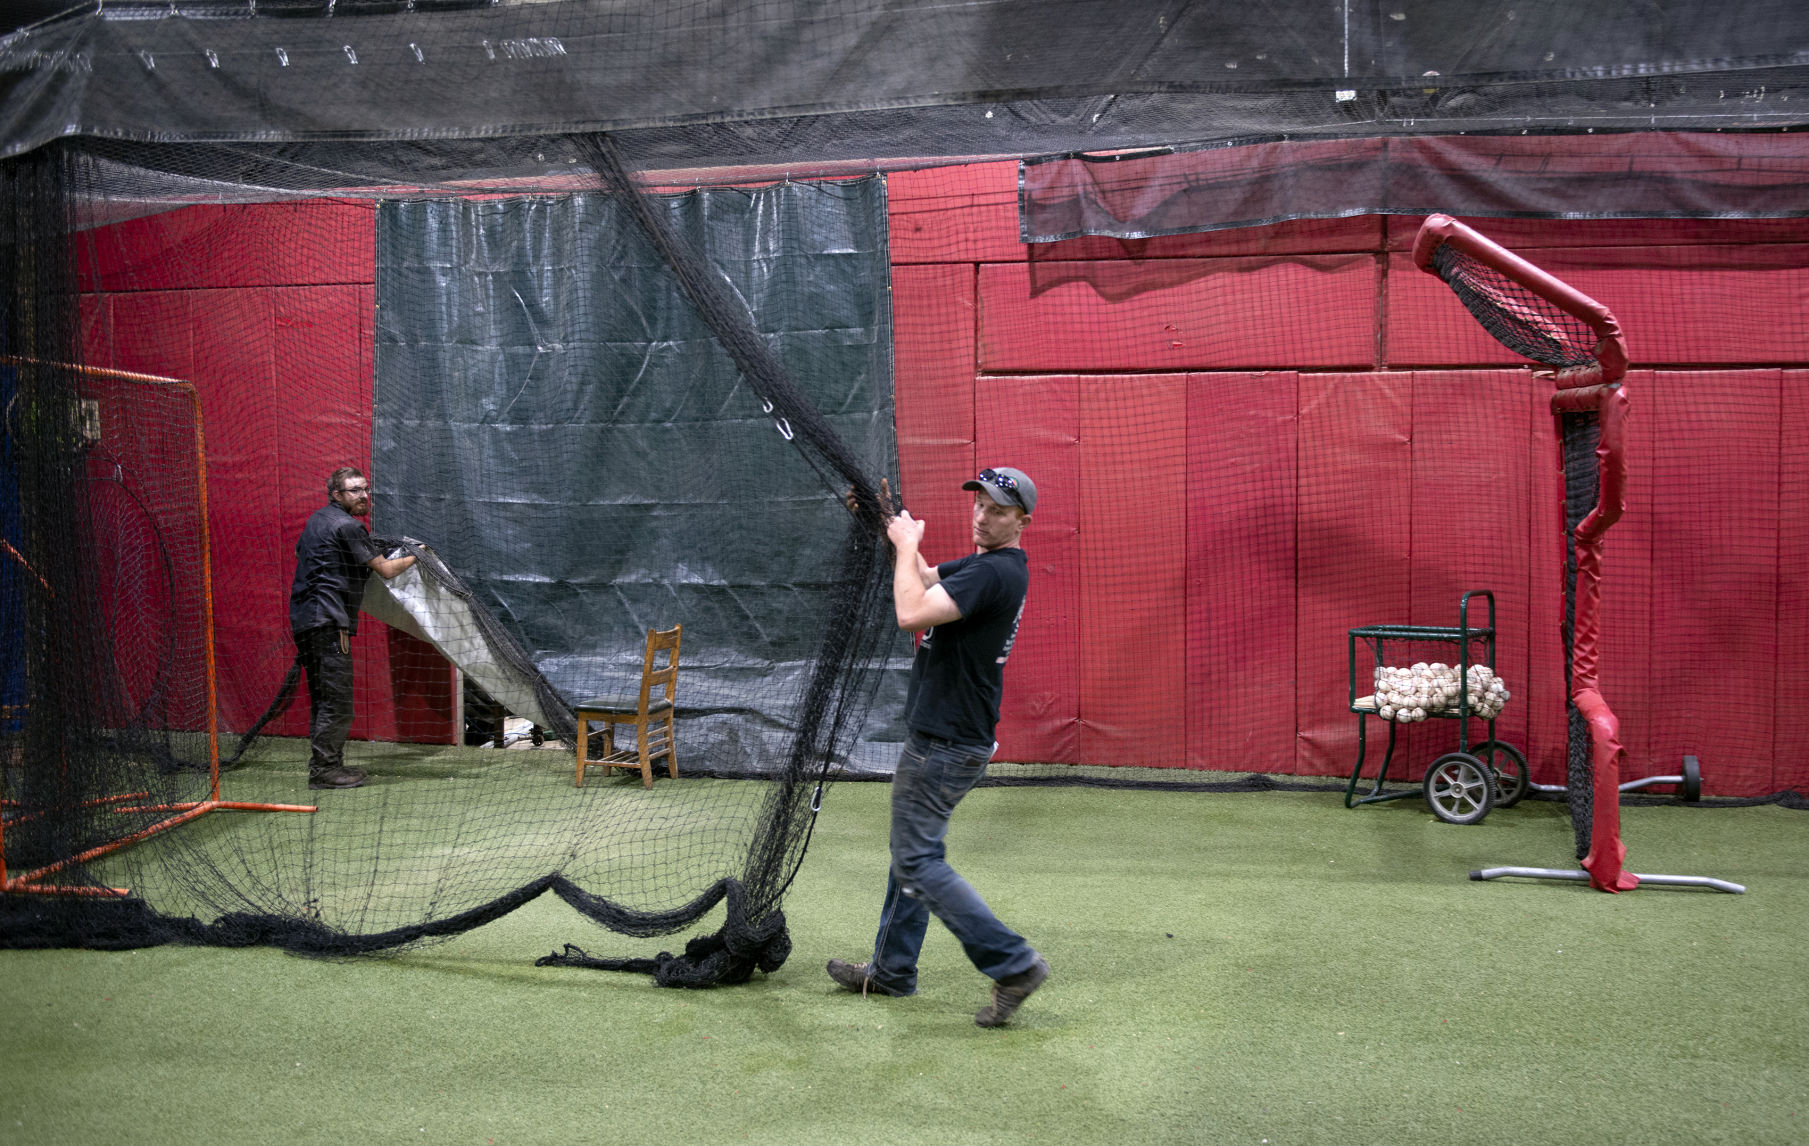 Matt Delaney pulls netting across the hitting area at Between the Laces batting cages facility in Farley.    PHOTO CREDIT: Dave LaBelle